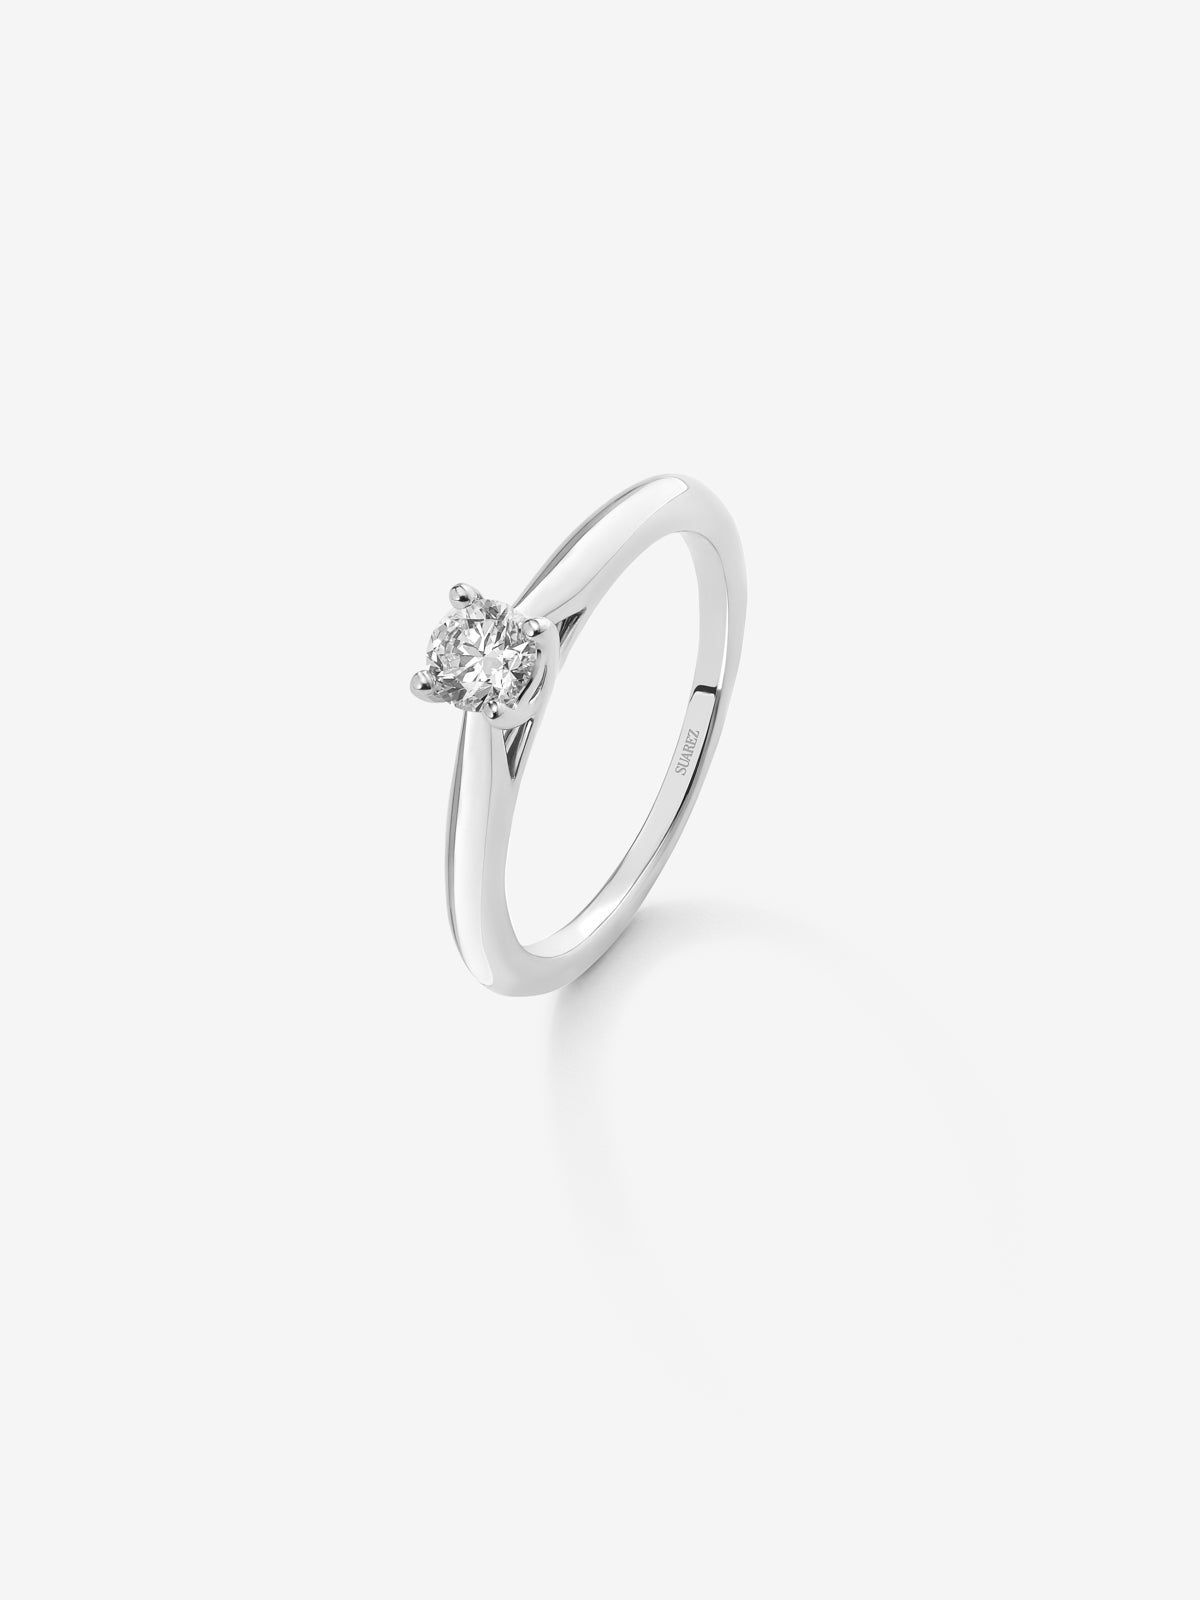 18K white gold solitaire ring with 0.08 ct brilliant cut diamond